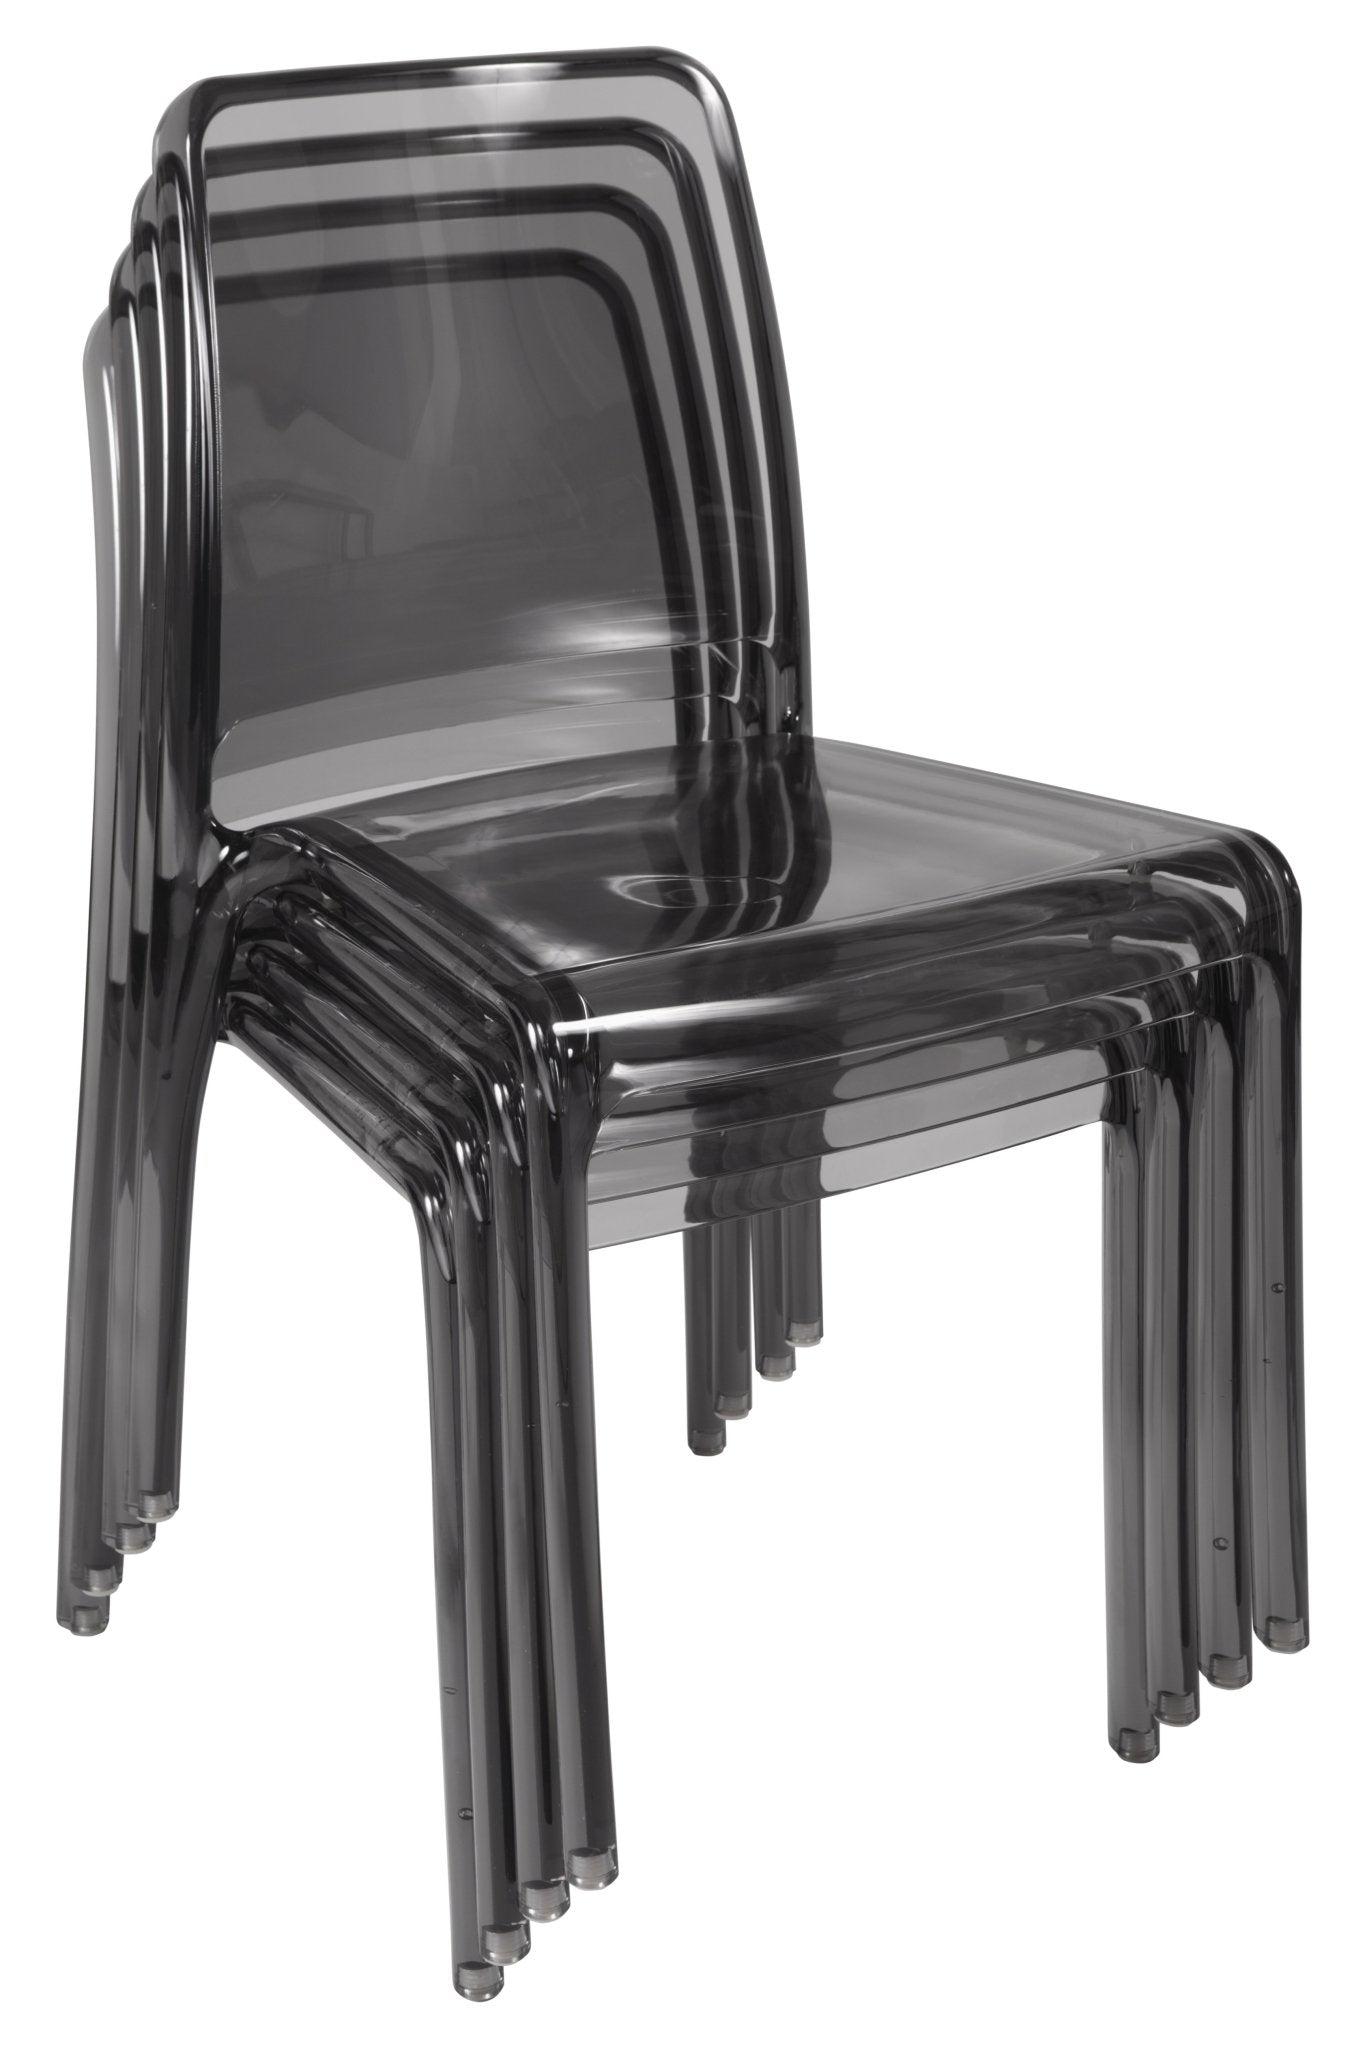 Clarity dining room chair (smoked) pack of 4 - crimblefest furniture - image 3